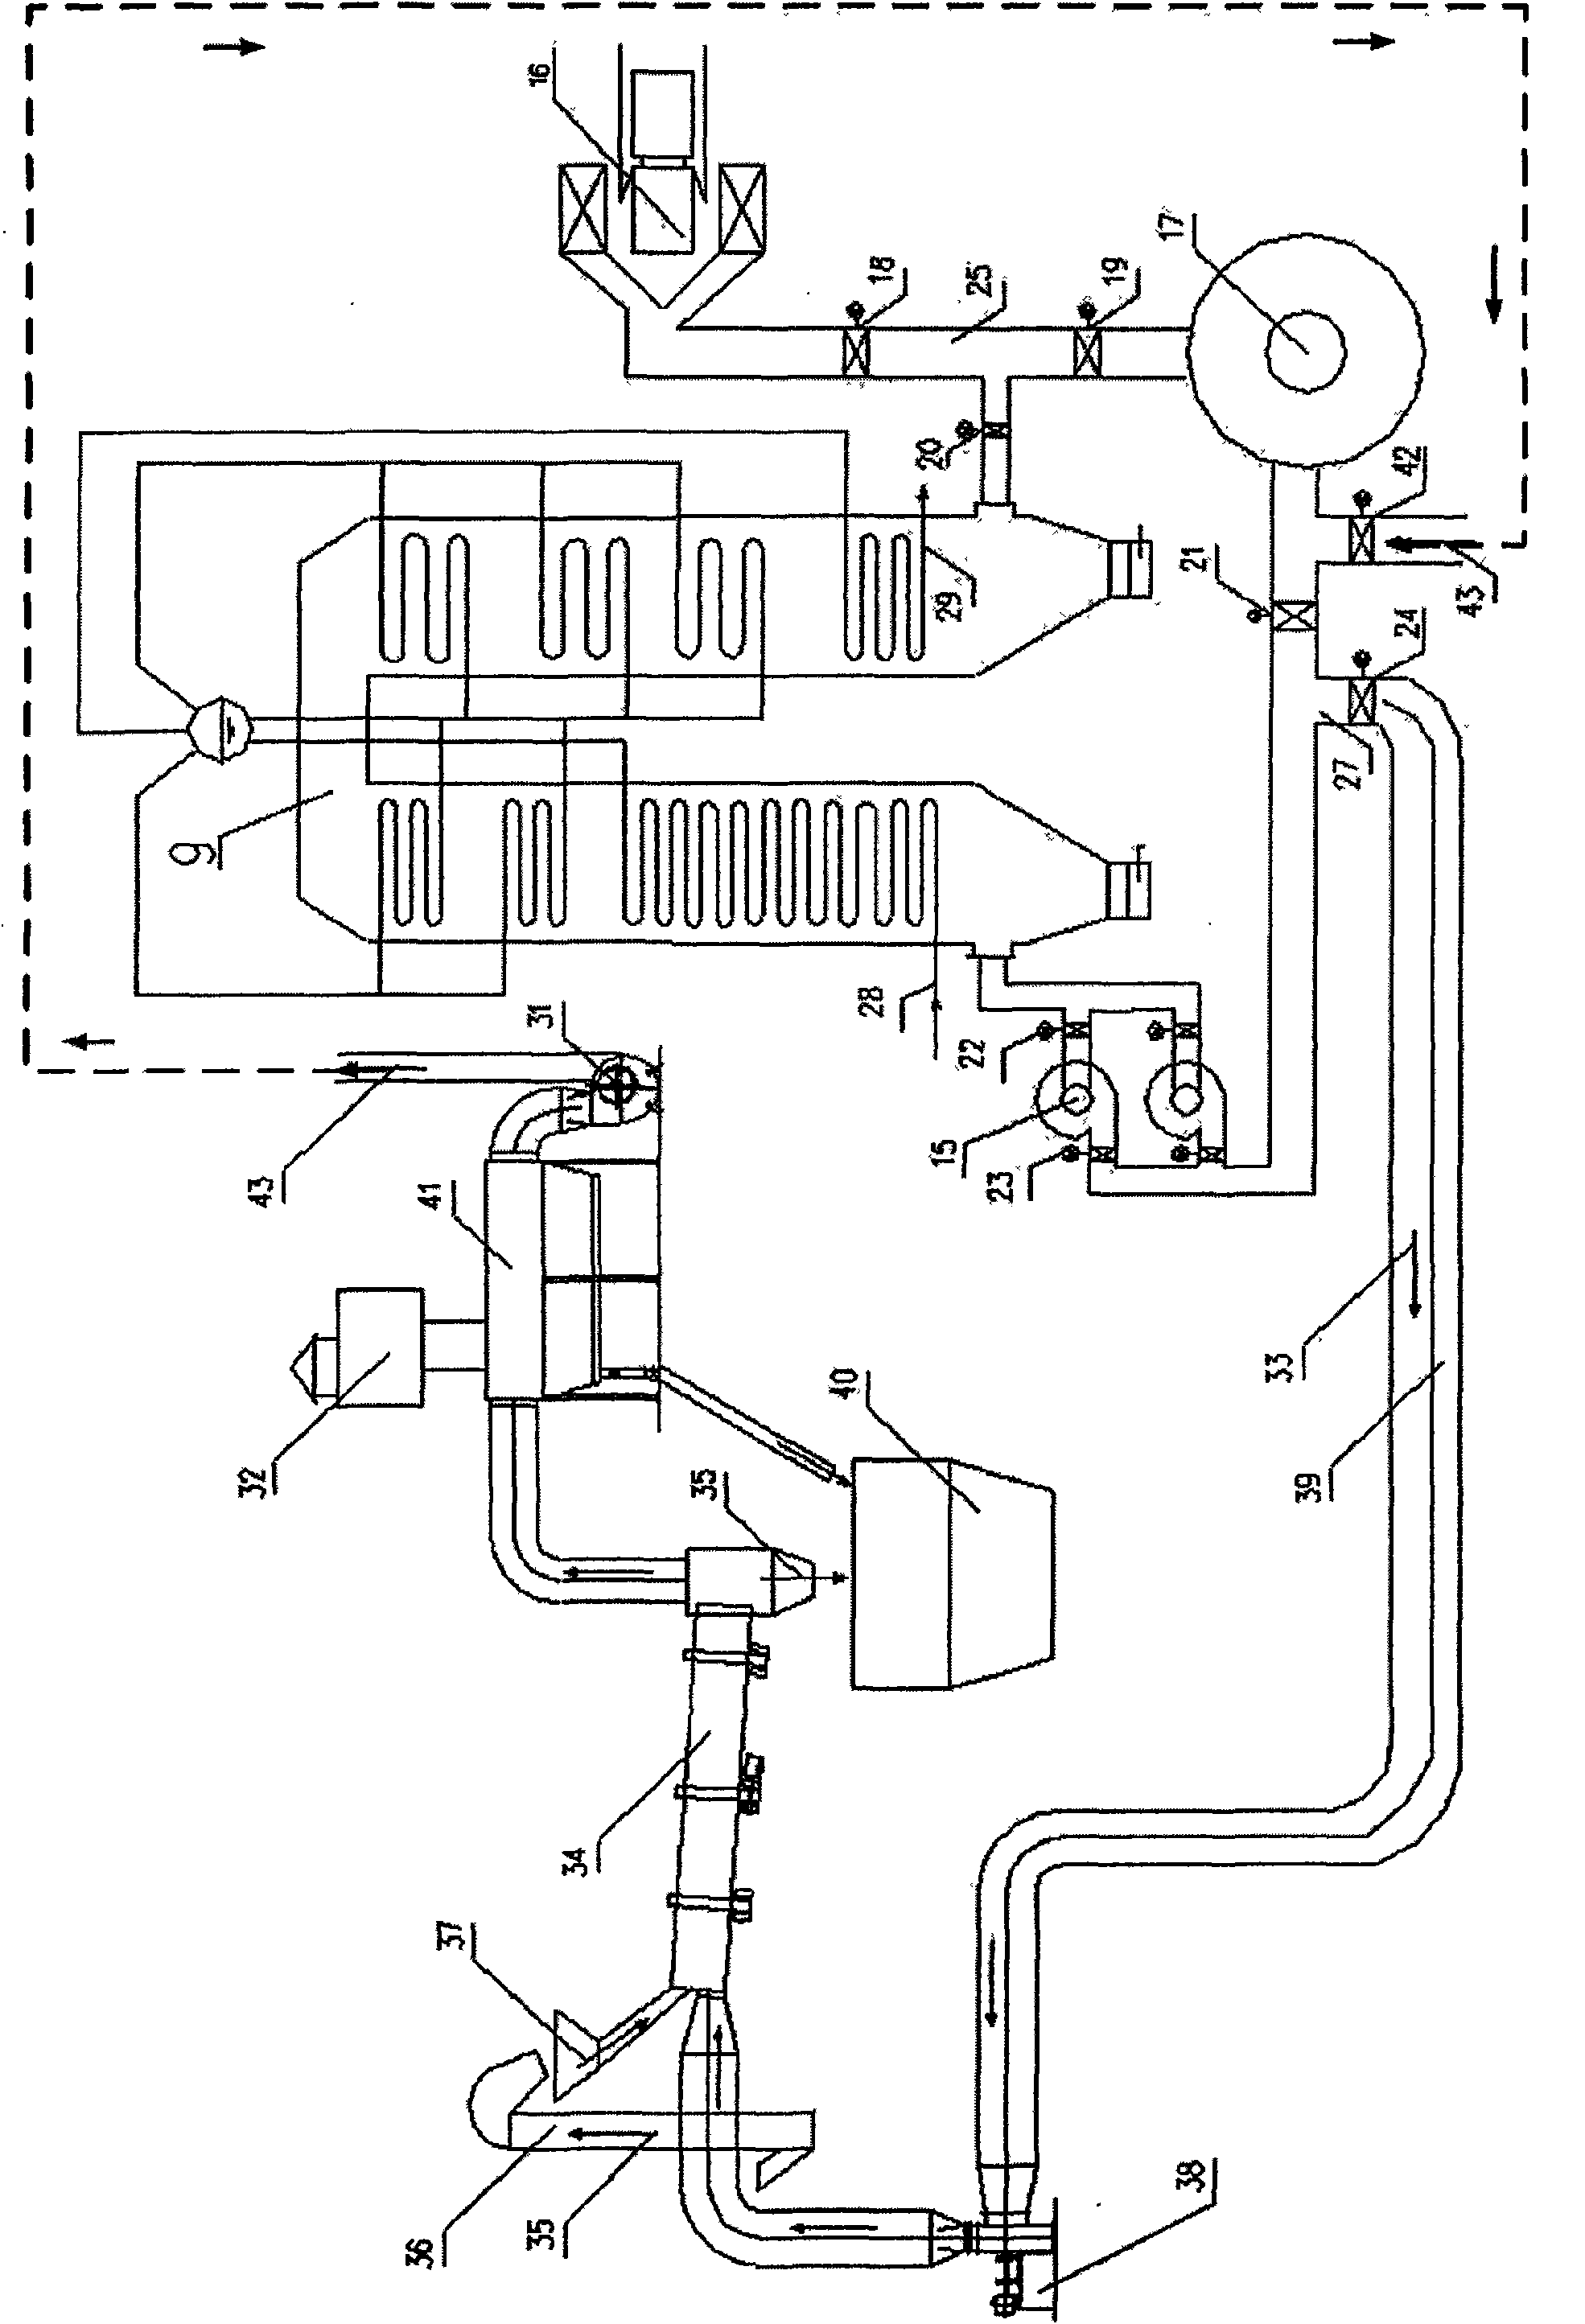 System for heating batch by utilizing secondary waste heat of float glass furnace